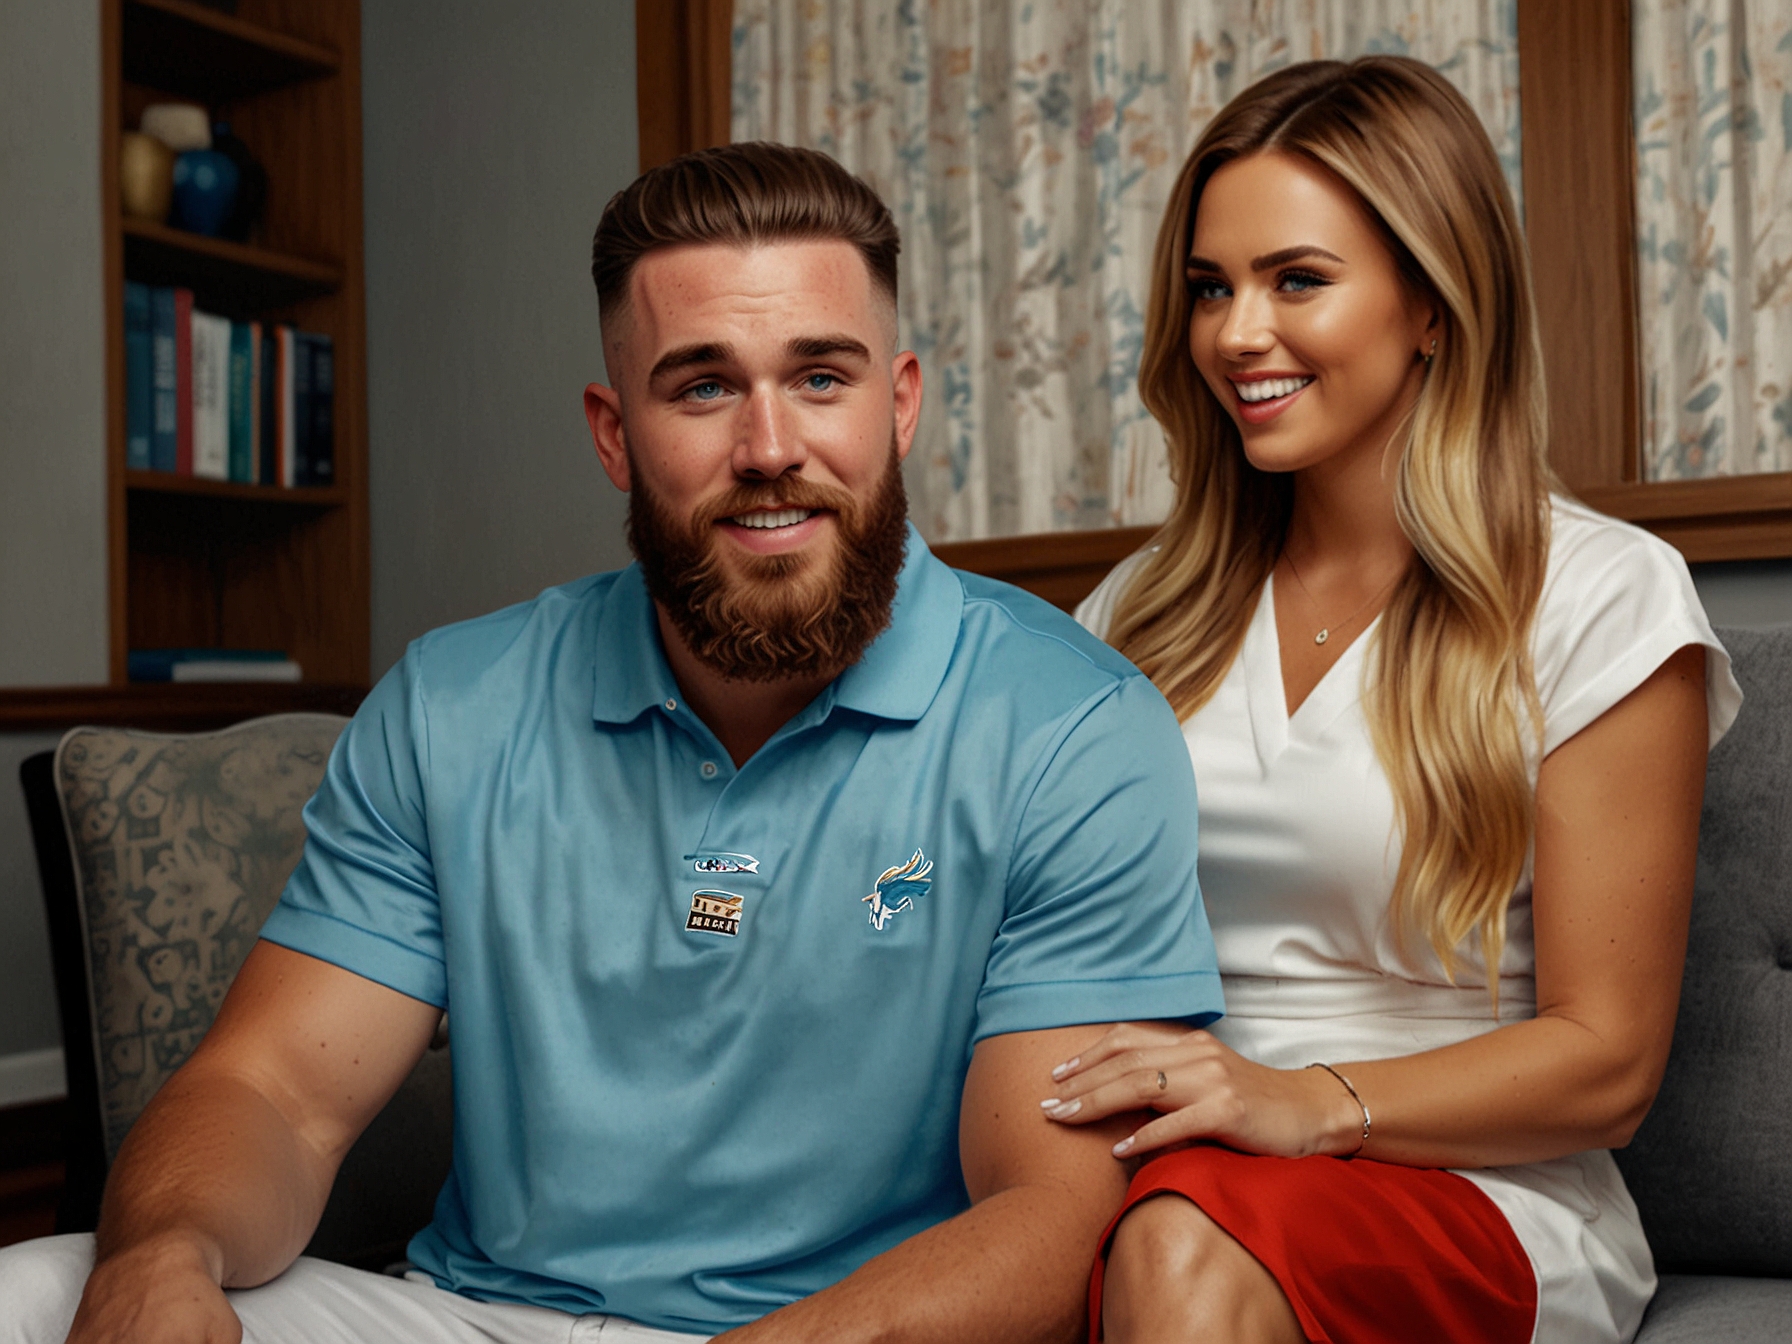 Travis Kelce speaks fondly of his sister-in-law Kylie Kelce during an interview, highlighting the close-knit nature of the Kelce family and commending her for handling a challenging situation with grace.